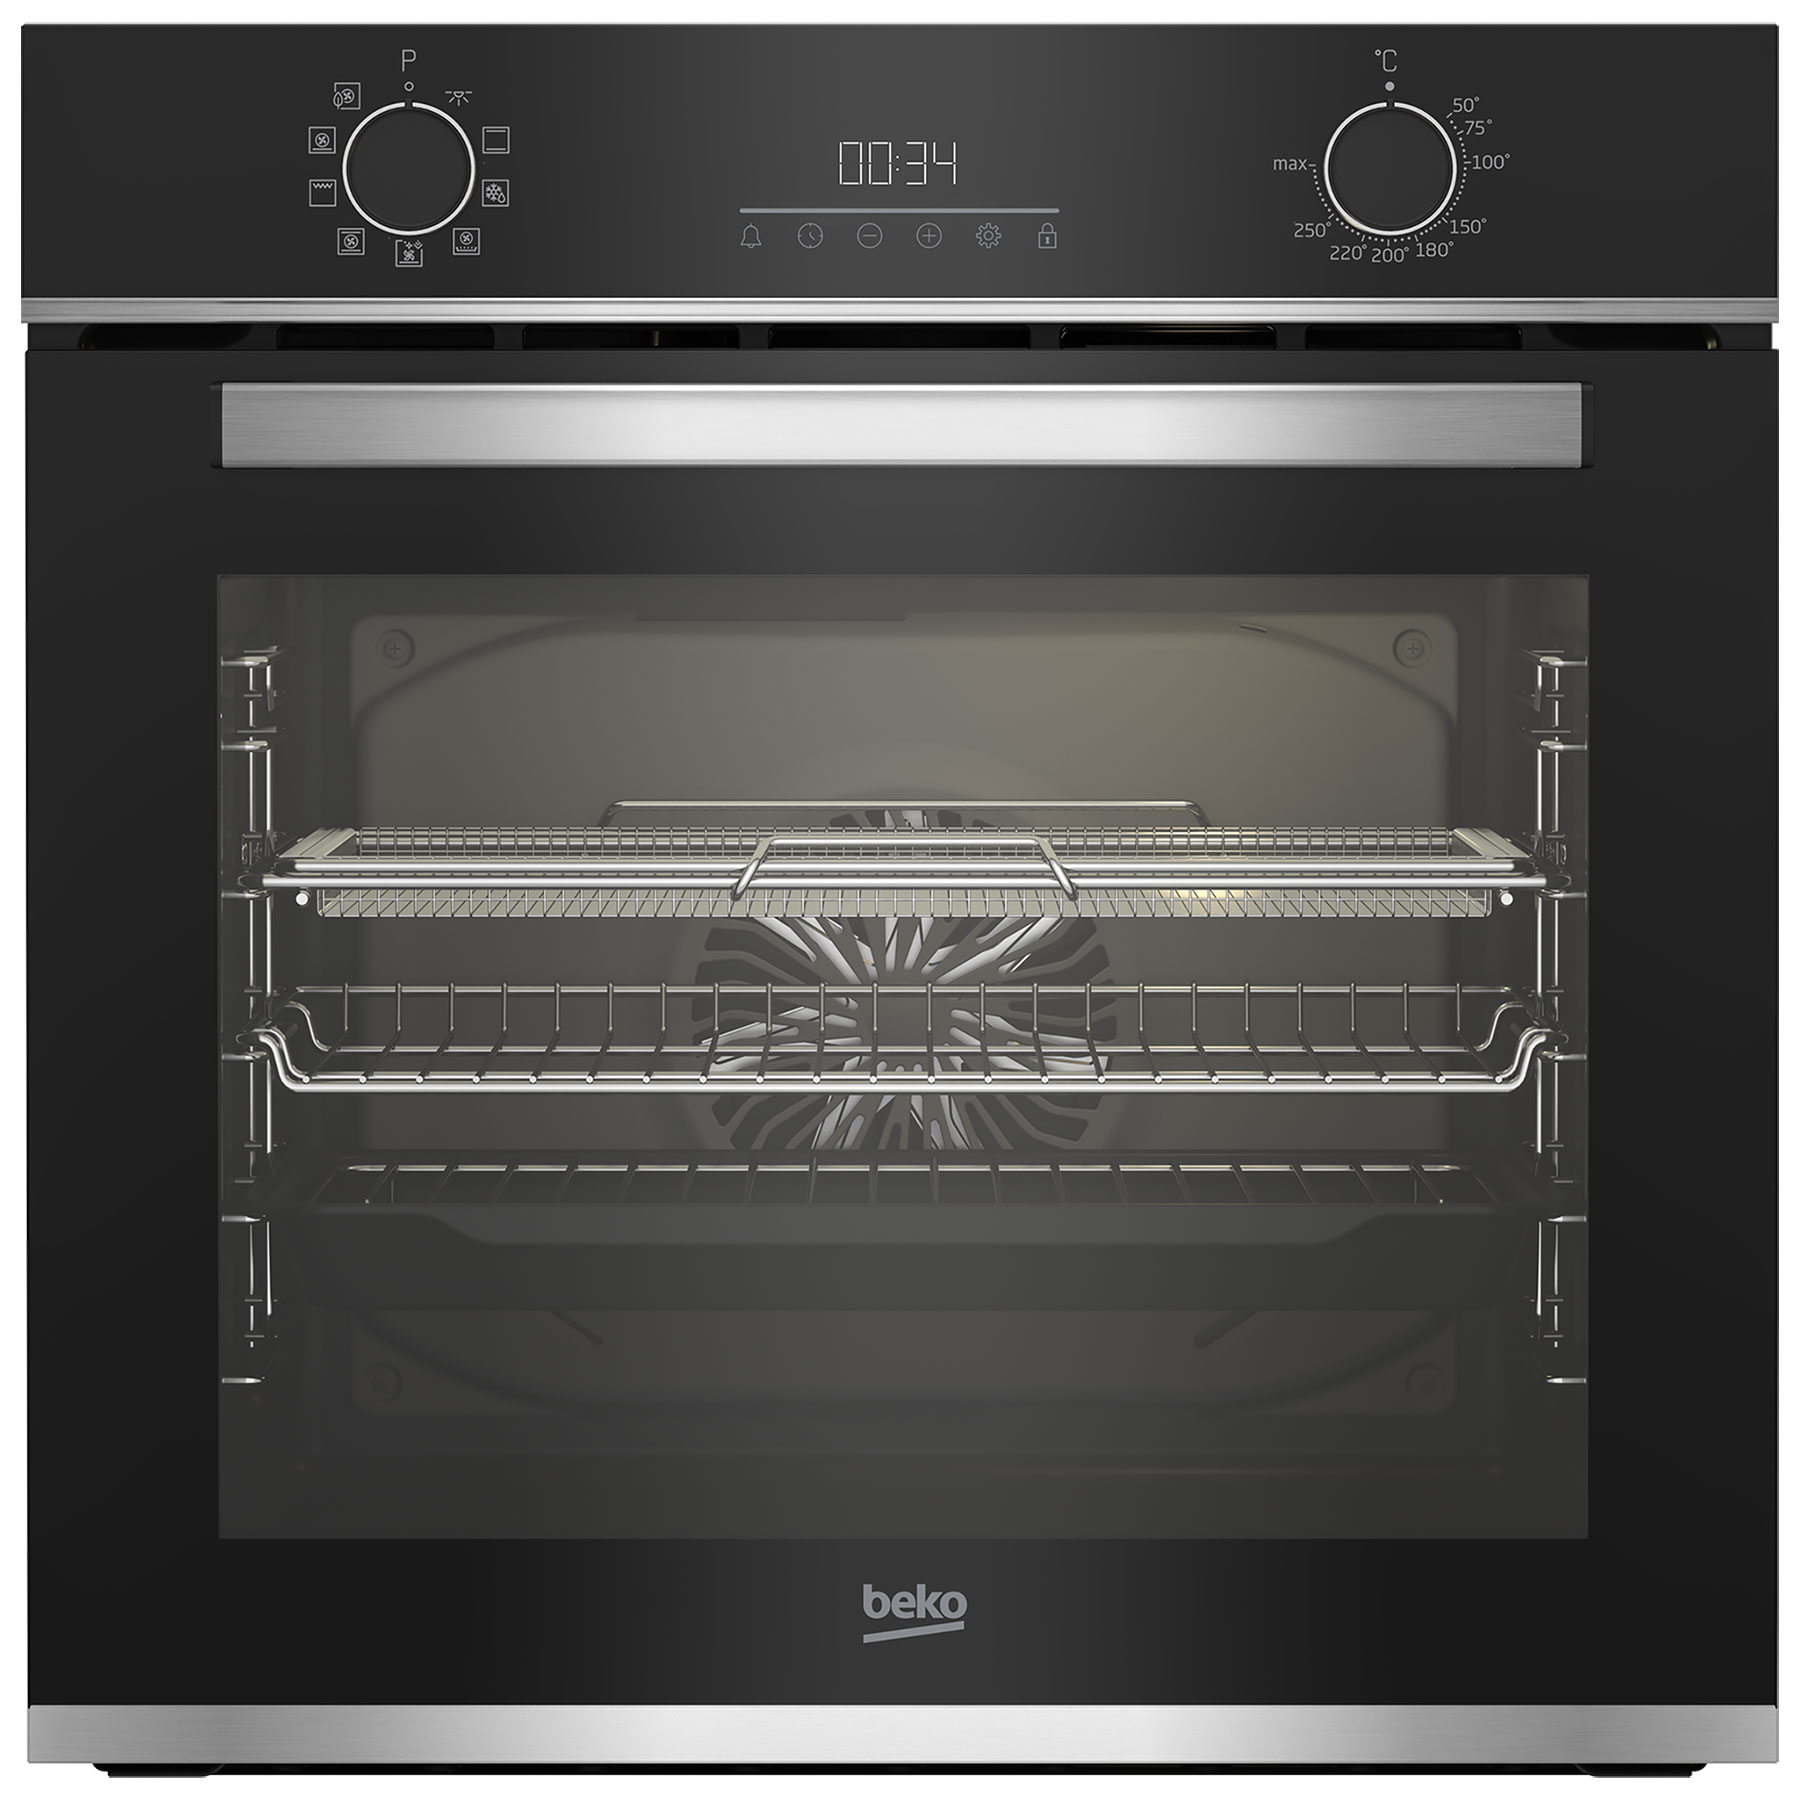 Image of Beko CIMYA91B Built In Electric Single Oven in Blk St St 72L A Rated